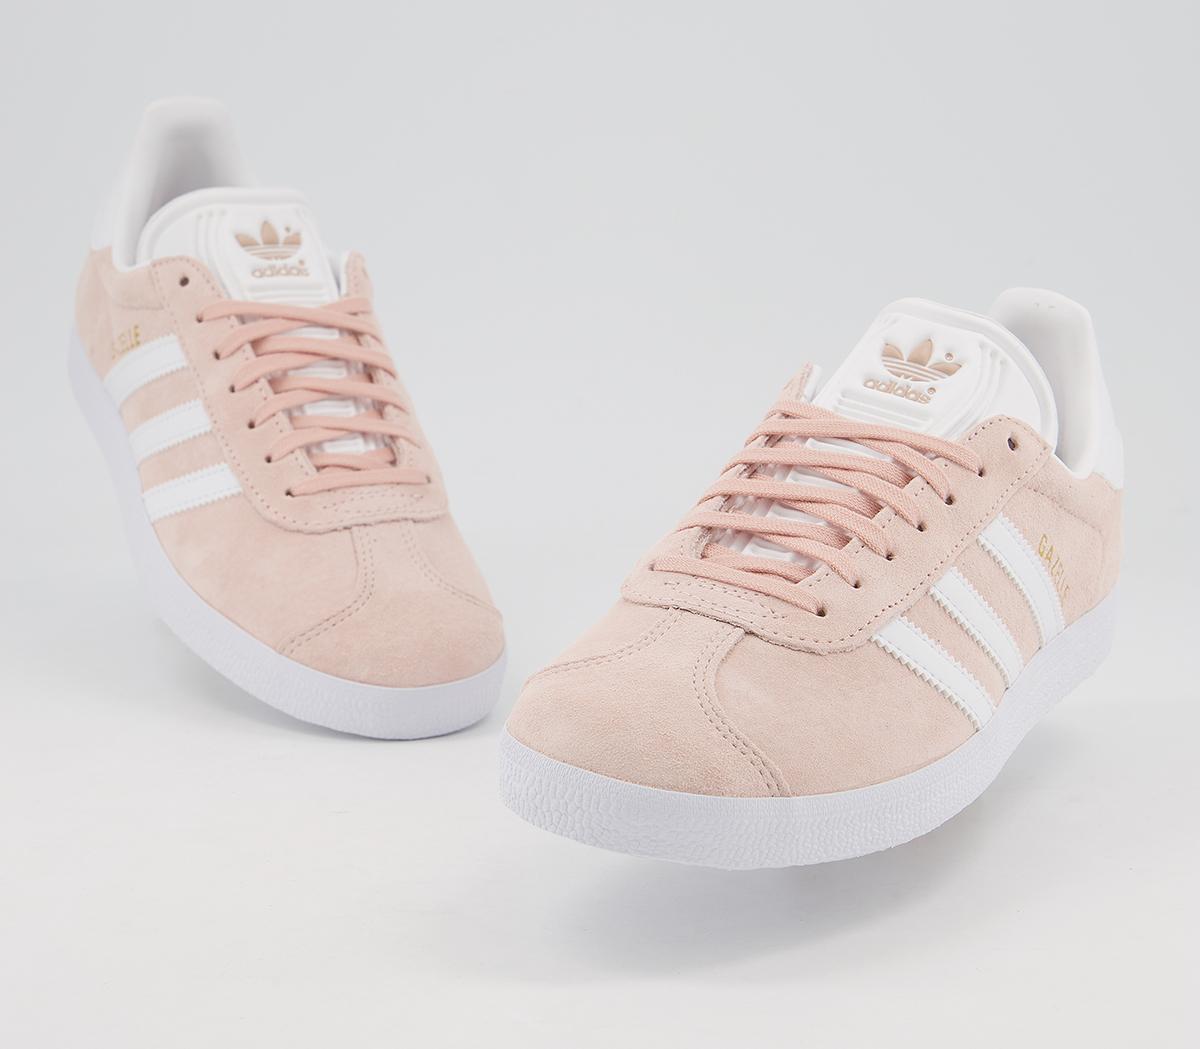 adidas Gazelle Vapour Pink White - His trainers